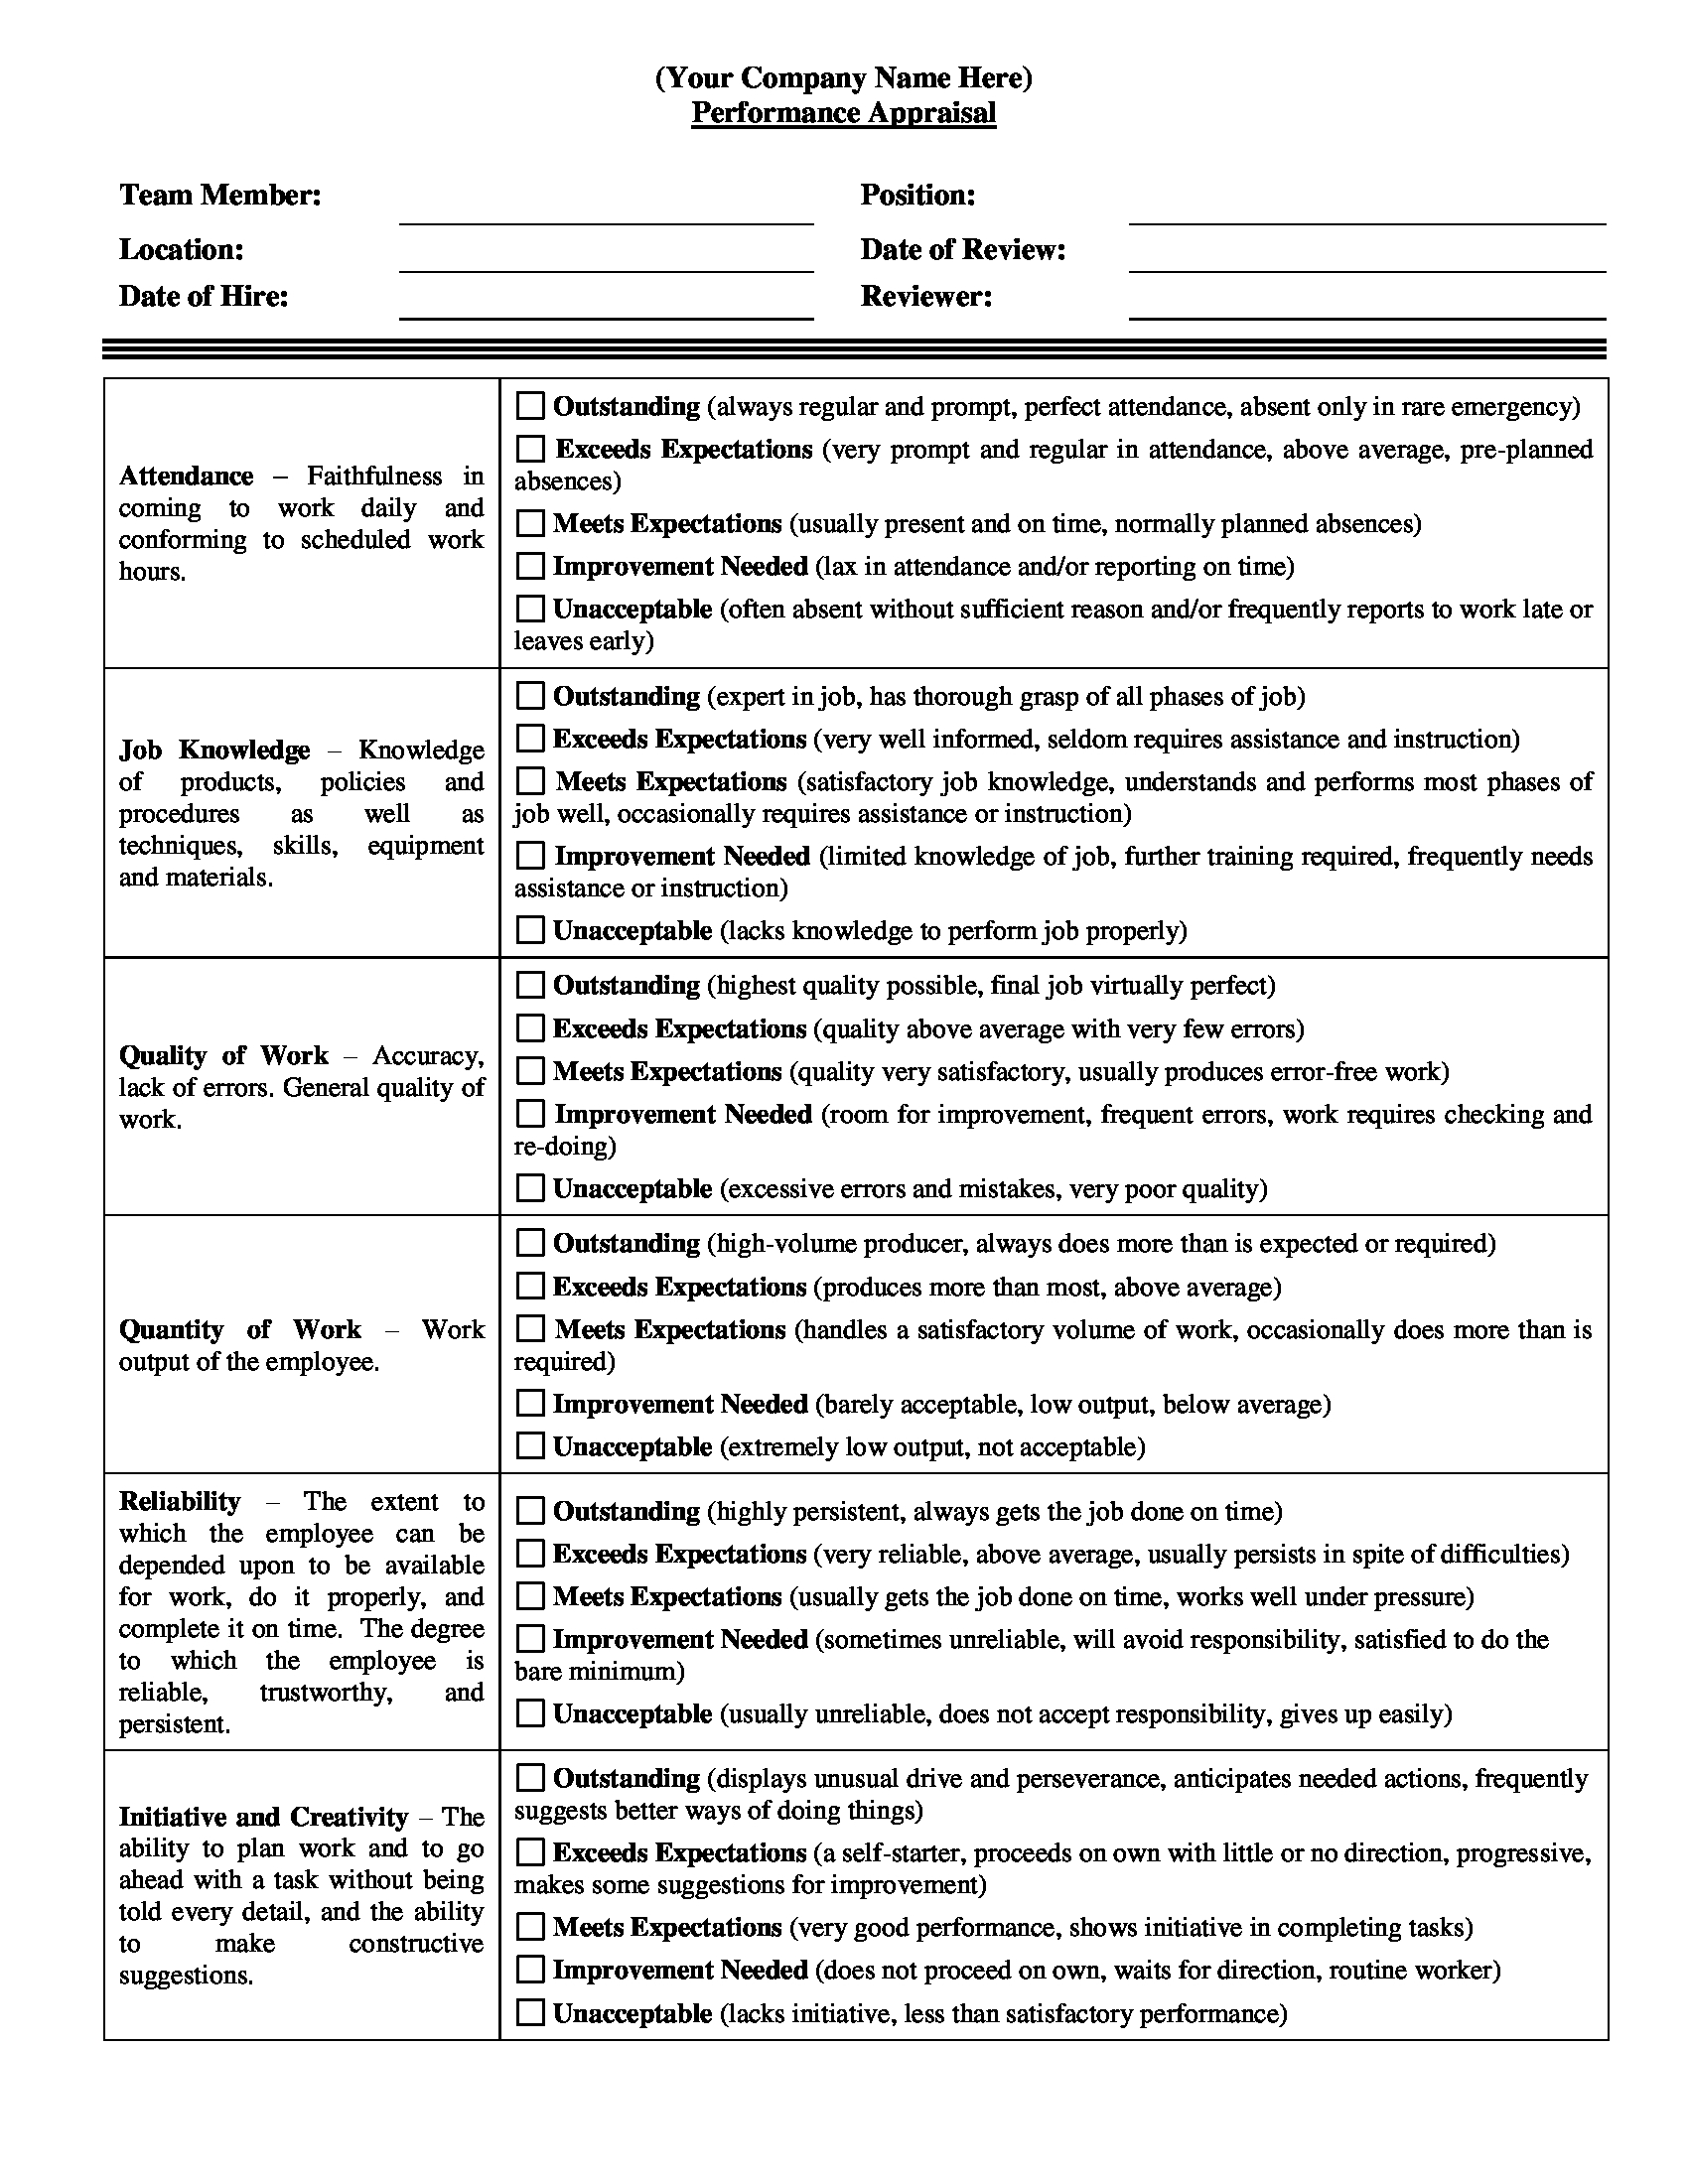 cook performance appraisal form 1